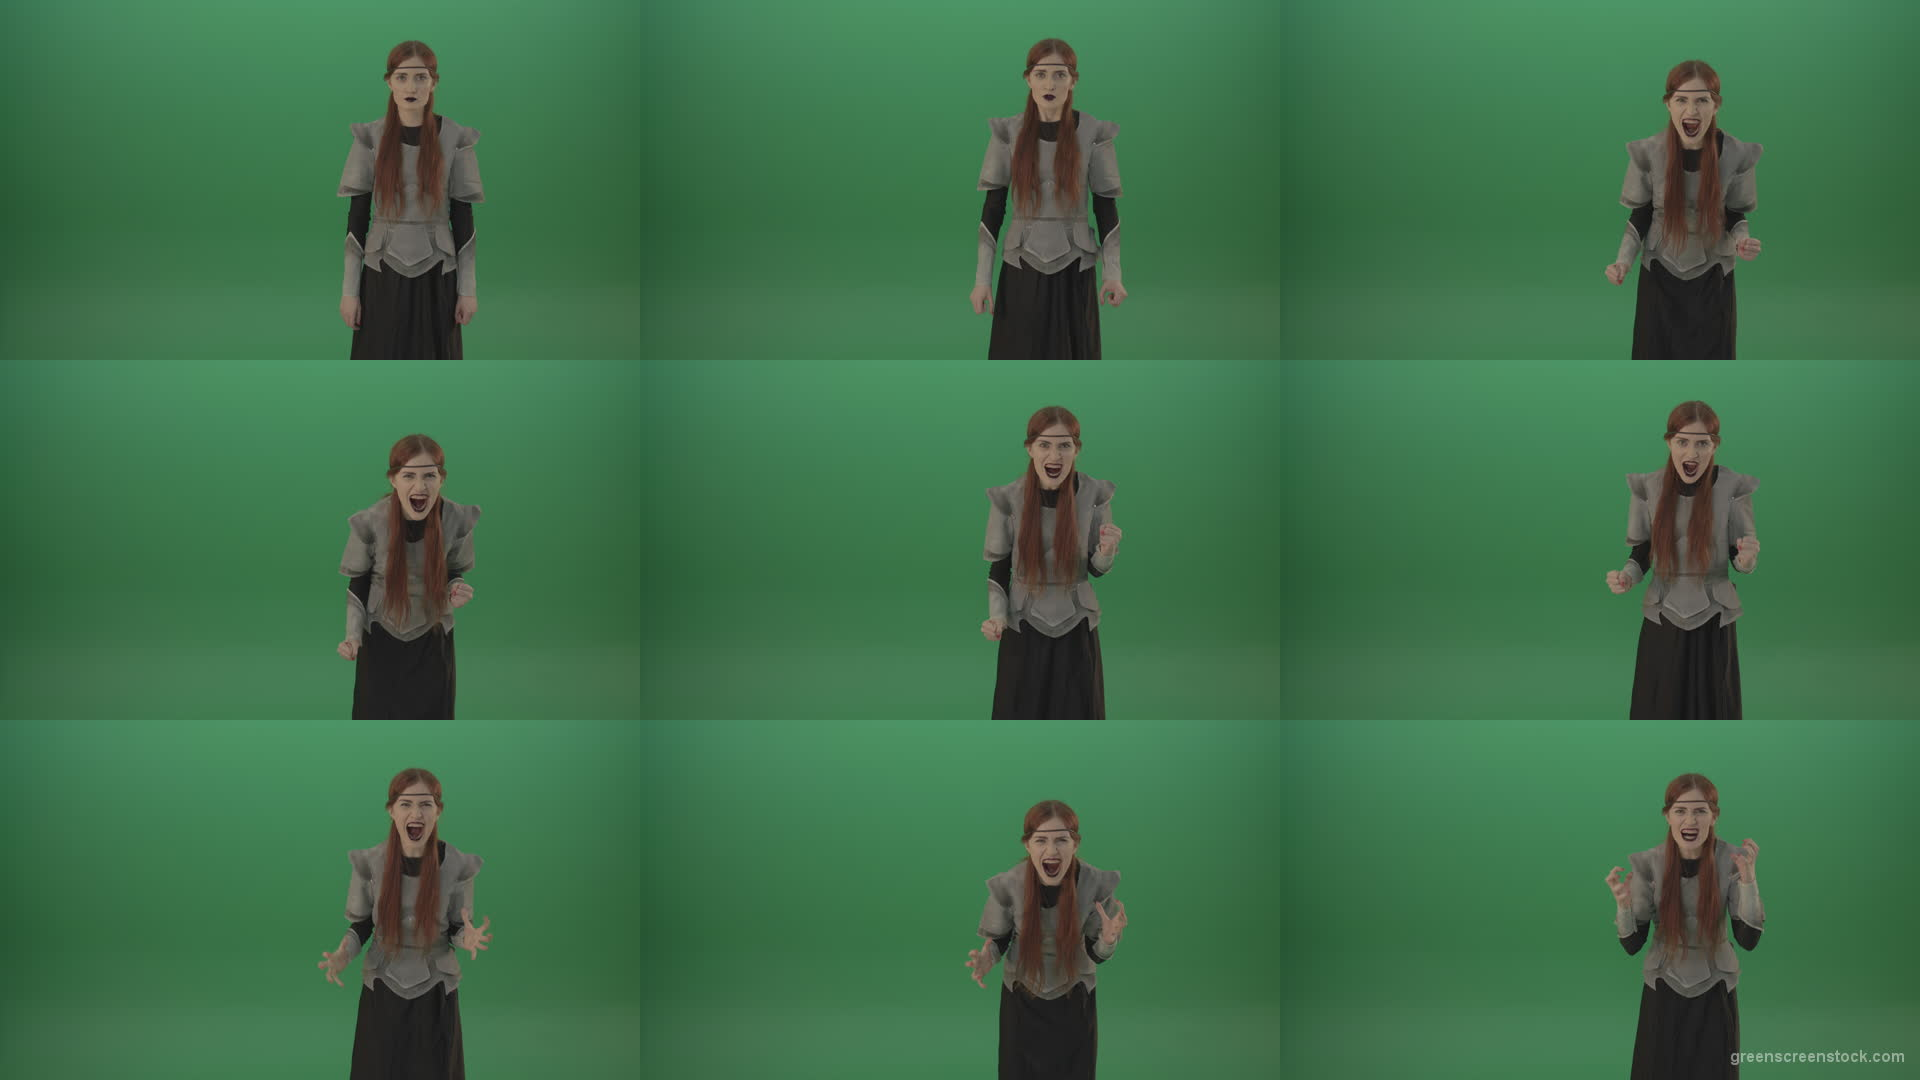 Witch-girl-watched-and-screamed-at-the-camera-with-green-eyes-on-a-green-background Green Screen Stock